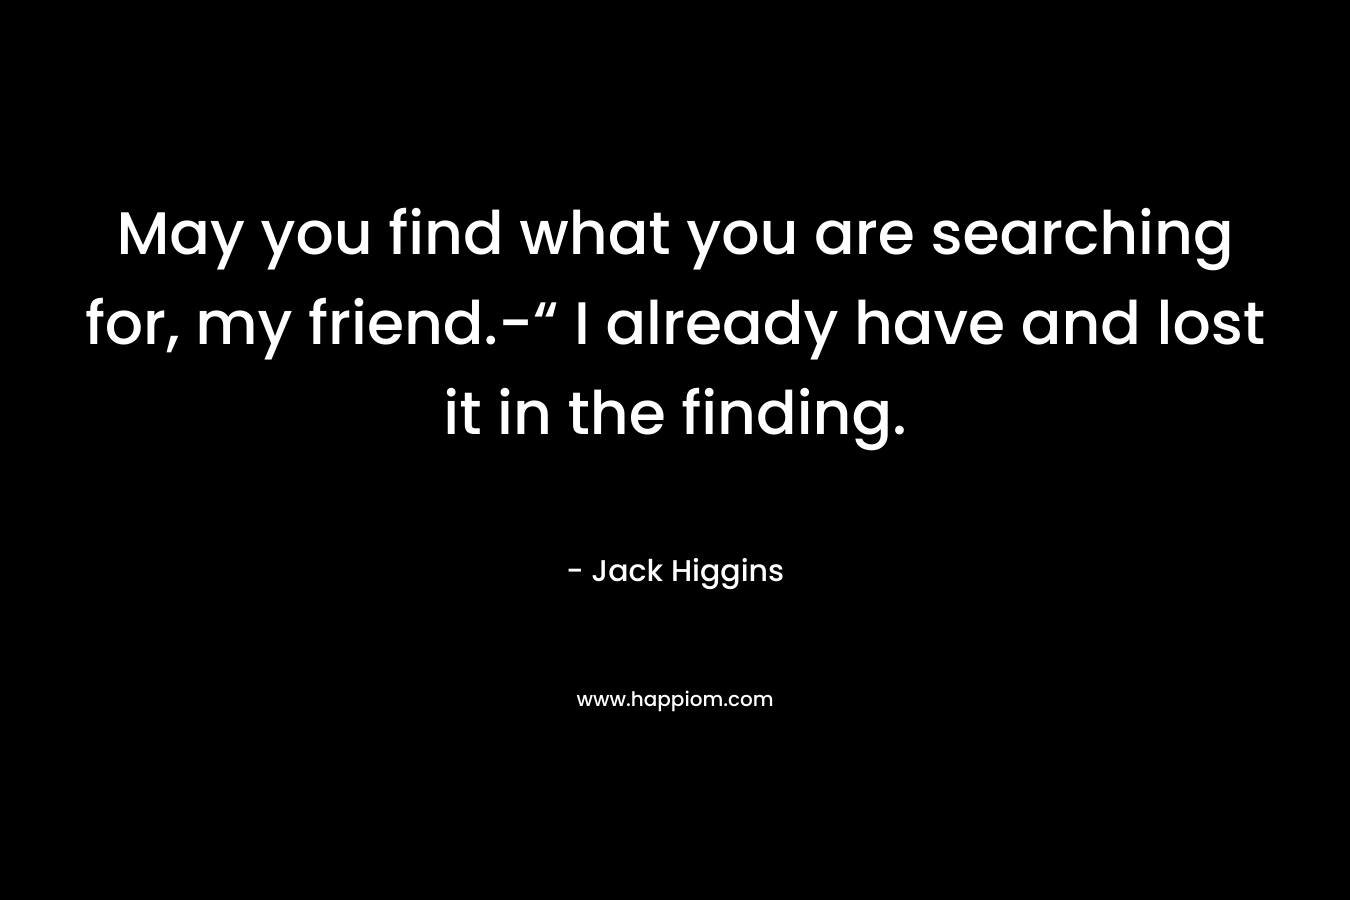 May you find what you are searching for, my friend.-“ I already have and lost it in the finding.